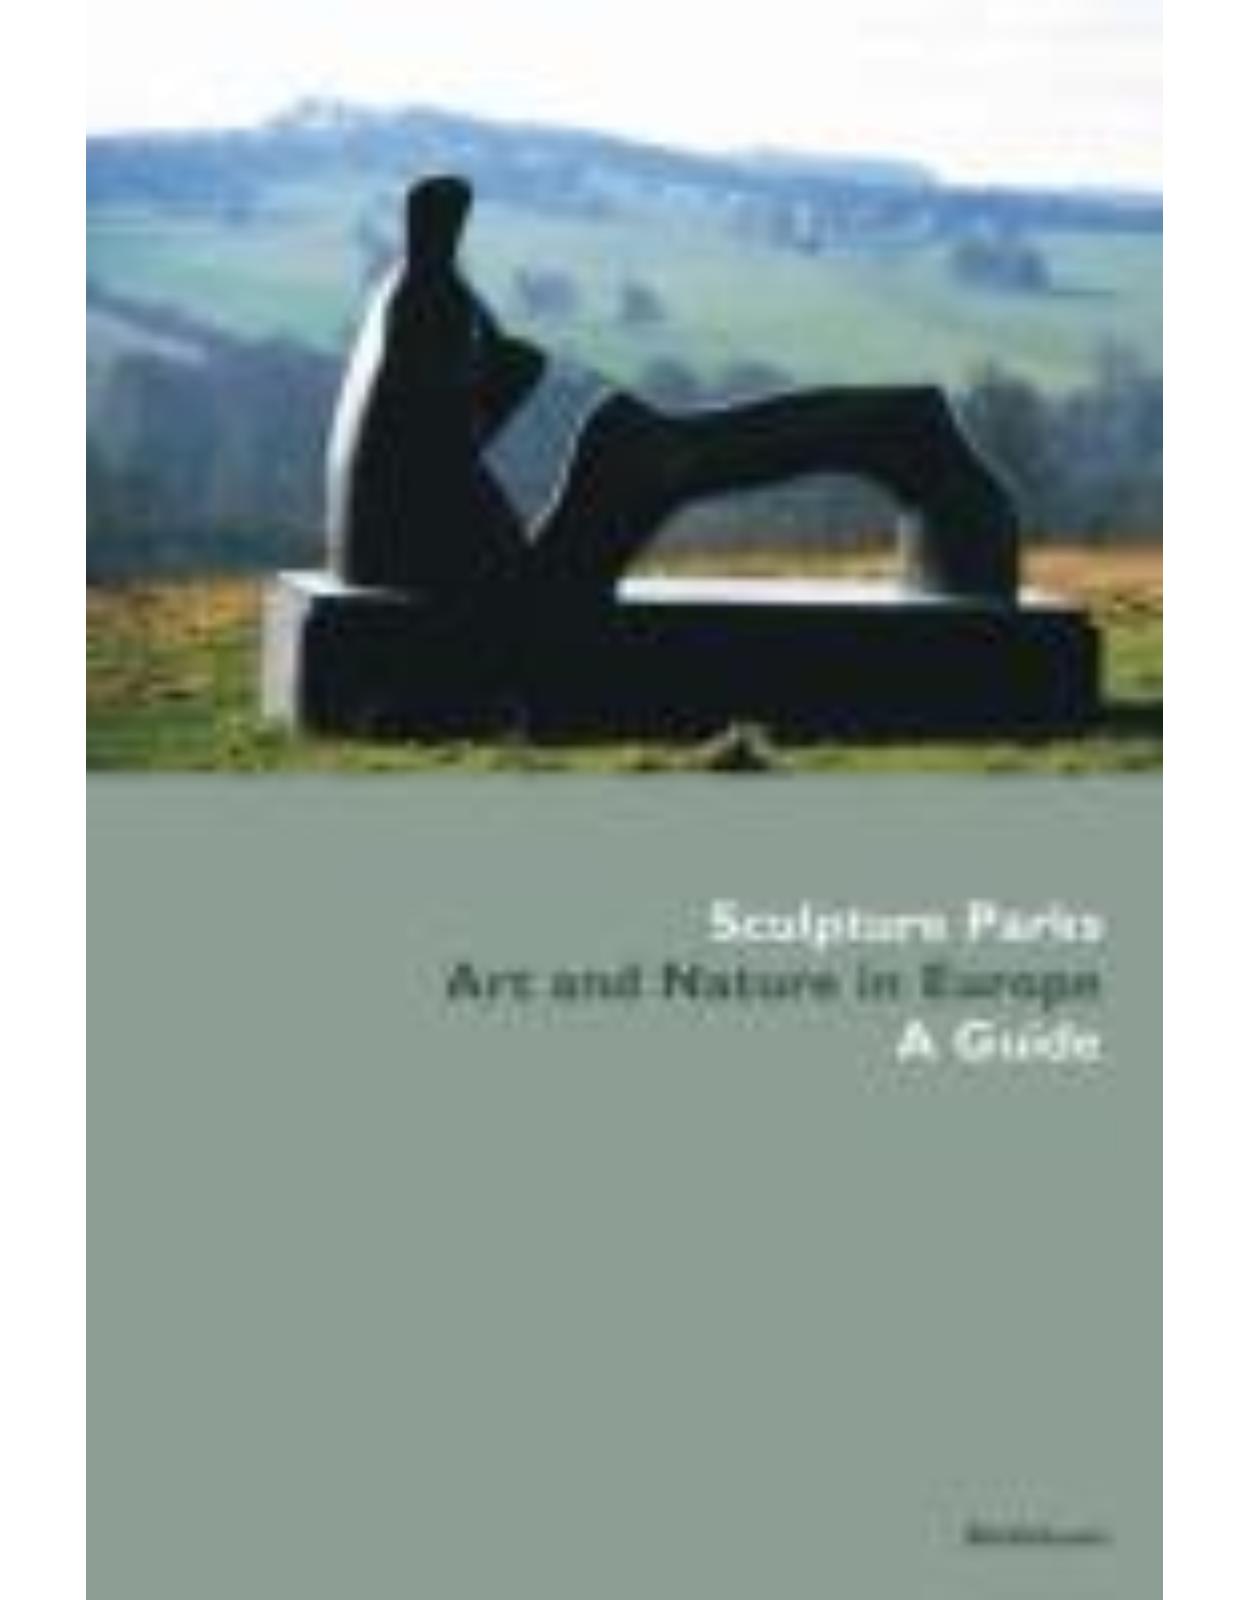 Sculpture Parks in Europe: A Guide to Art and Nature